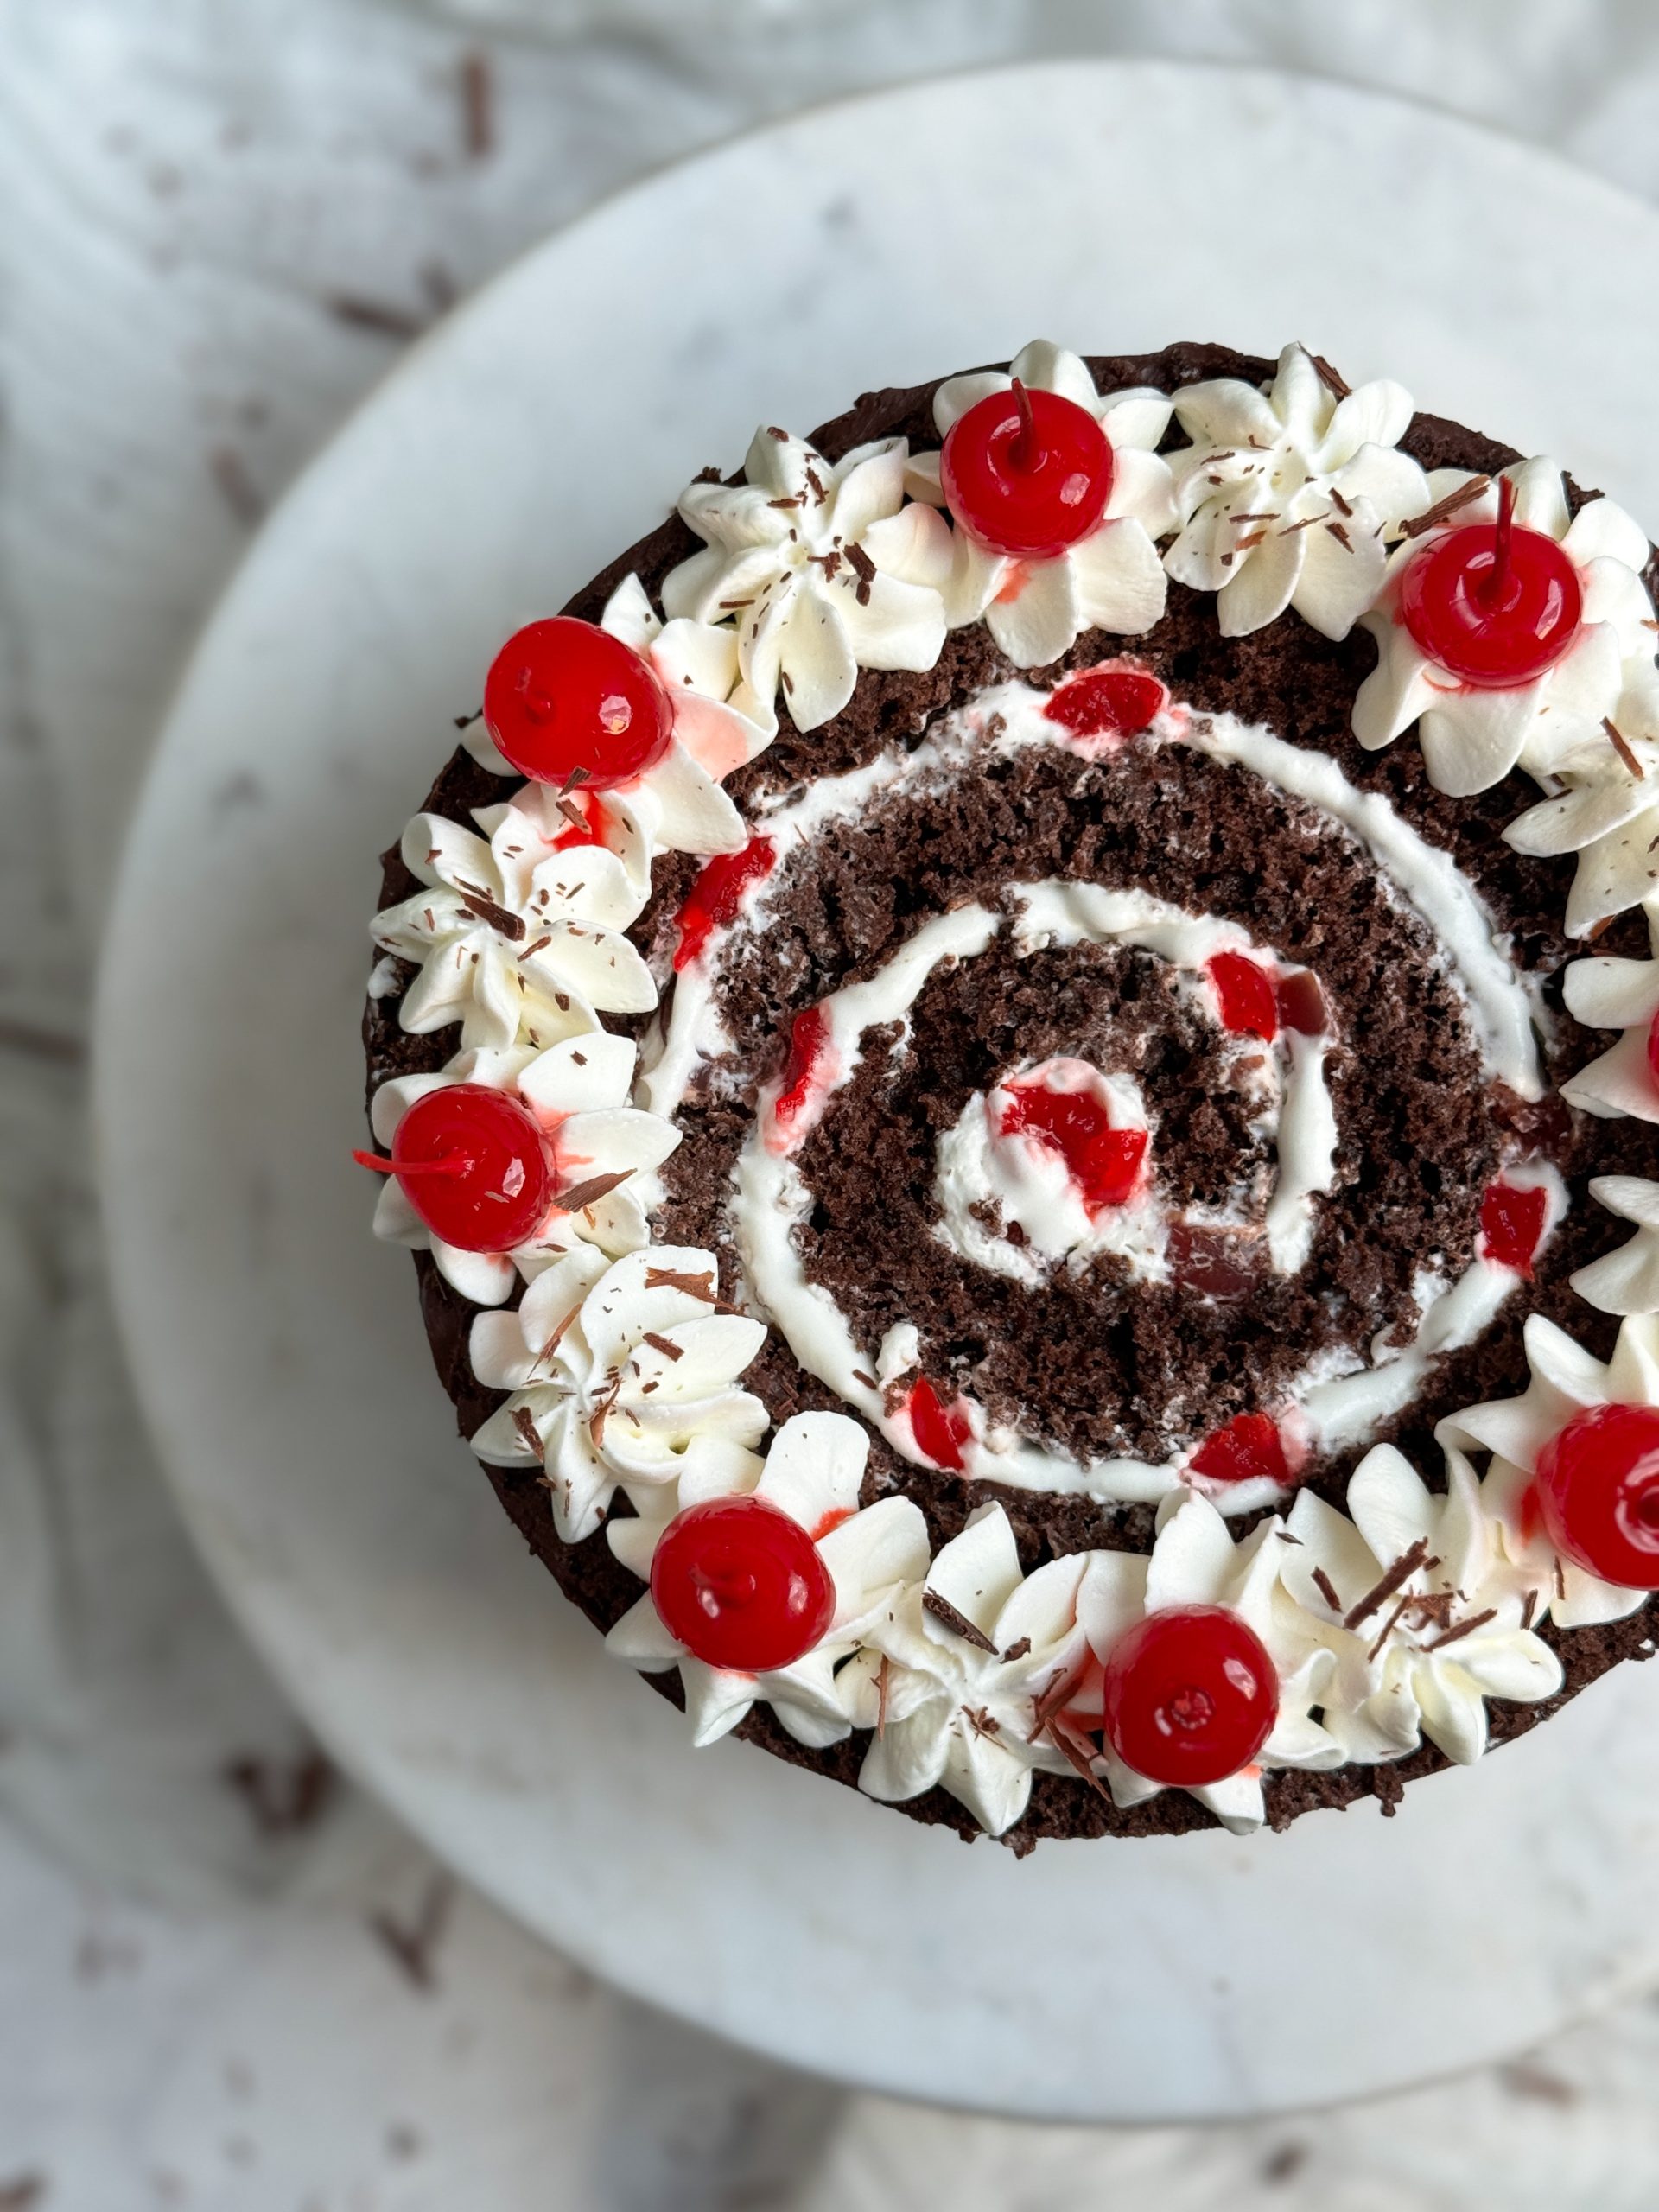 vertical black forest swiss roll cake from the top. the cake has a swirl of chocolate cake and whipped cream, with cream and cherries used for decoration on top. close up picture